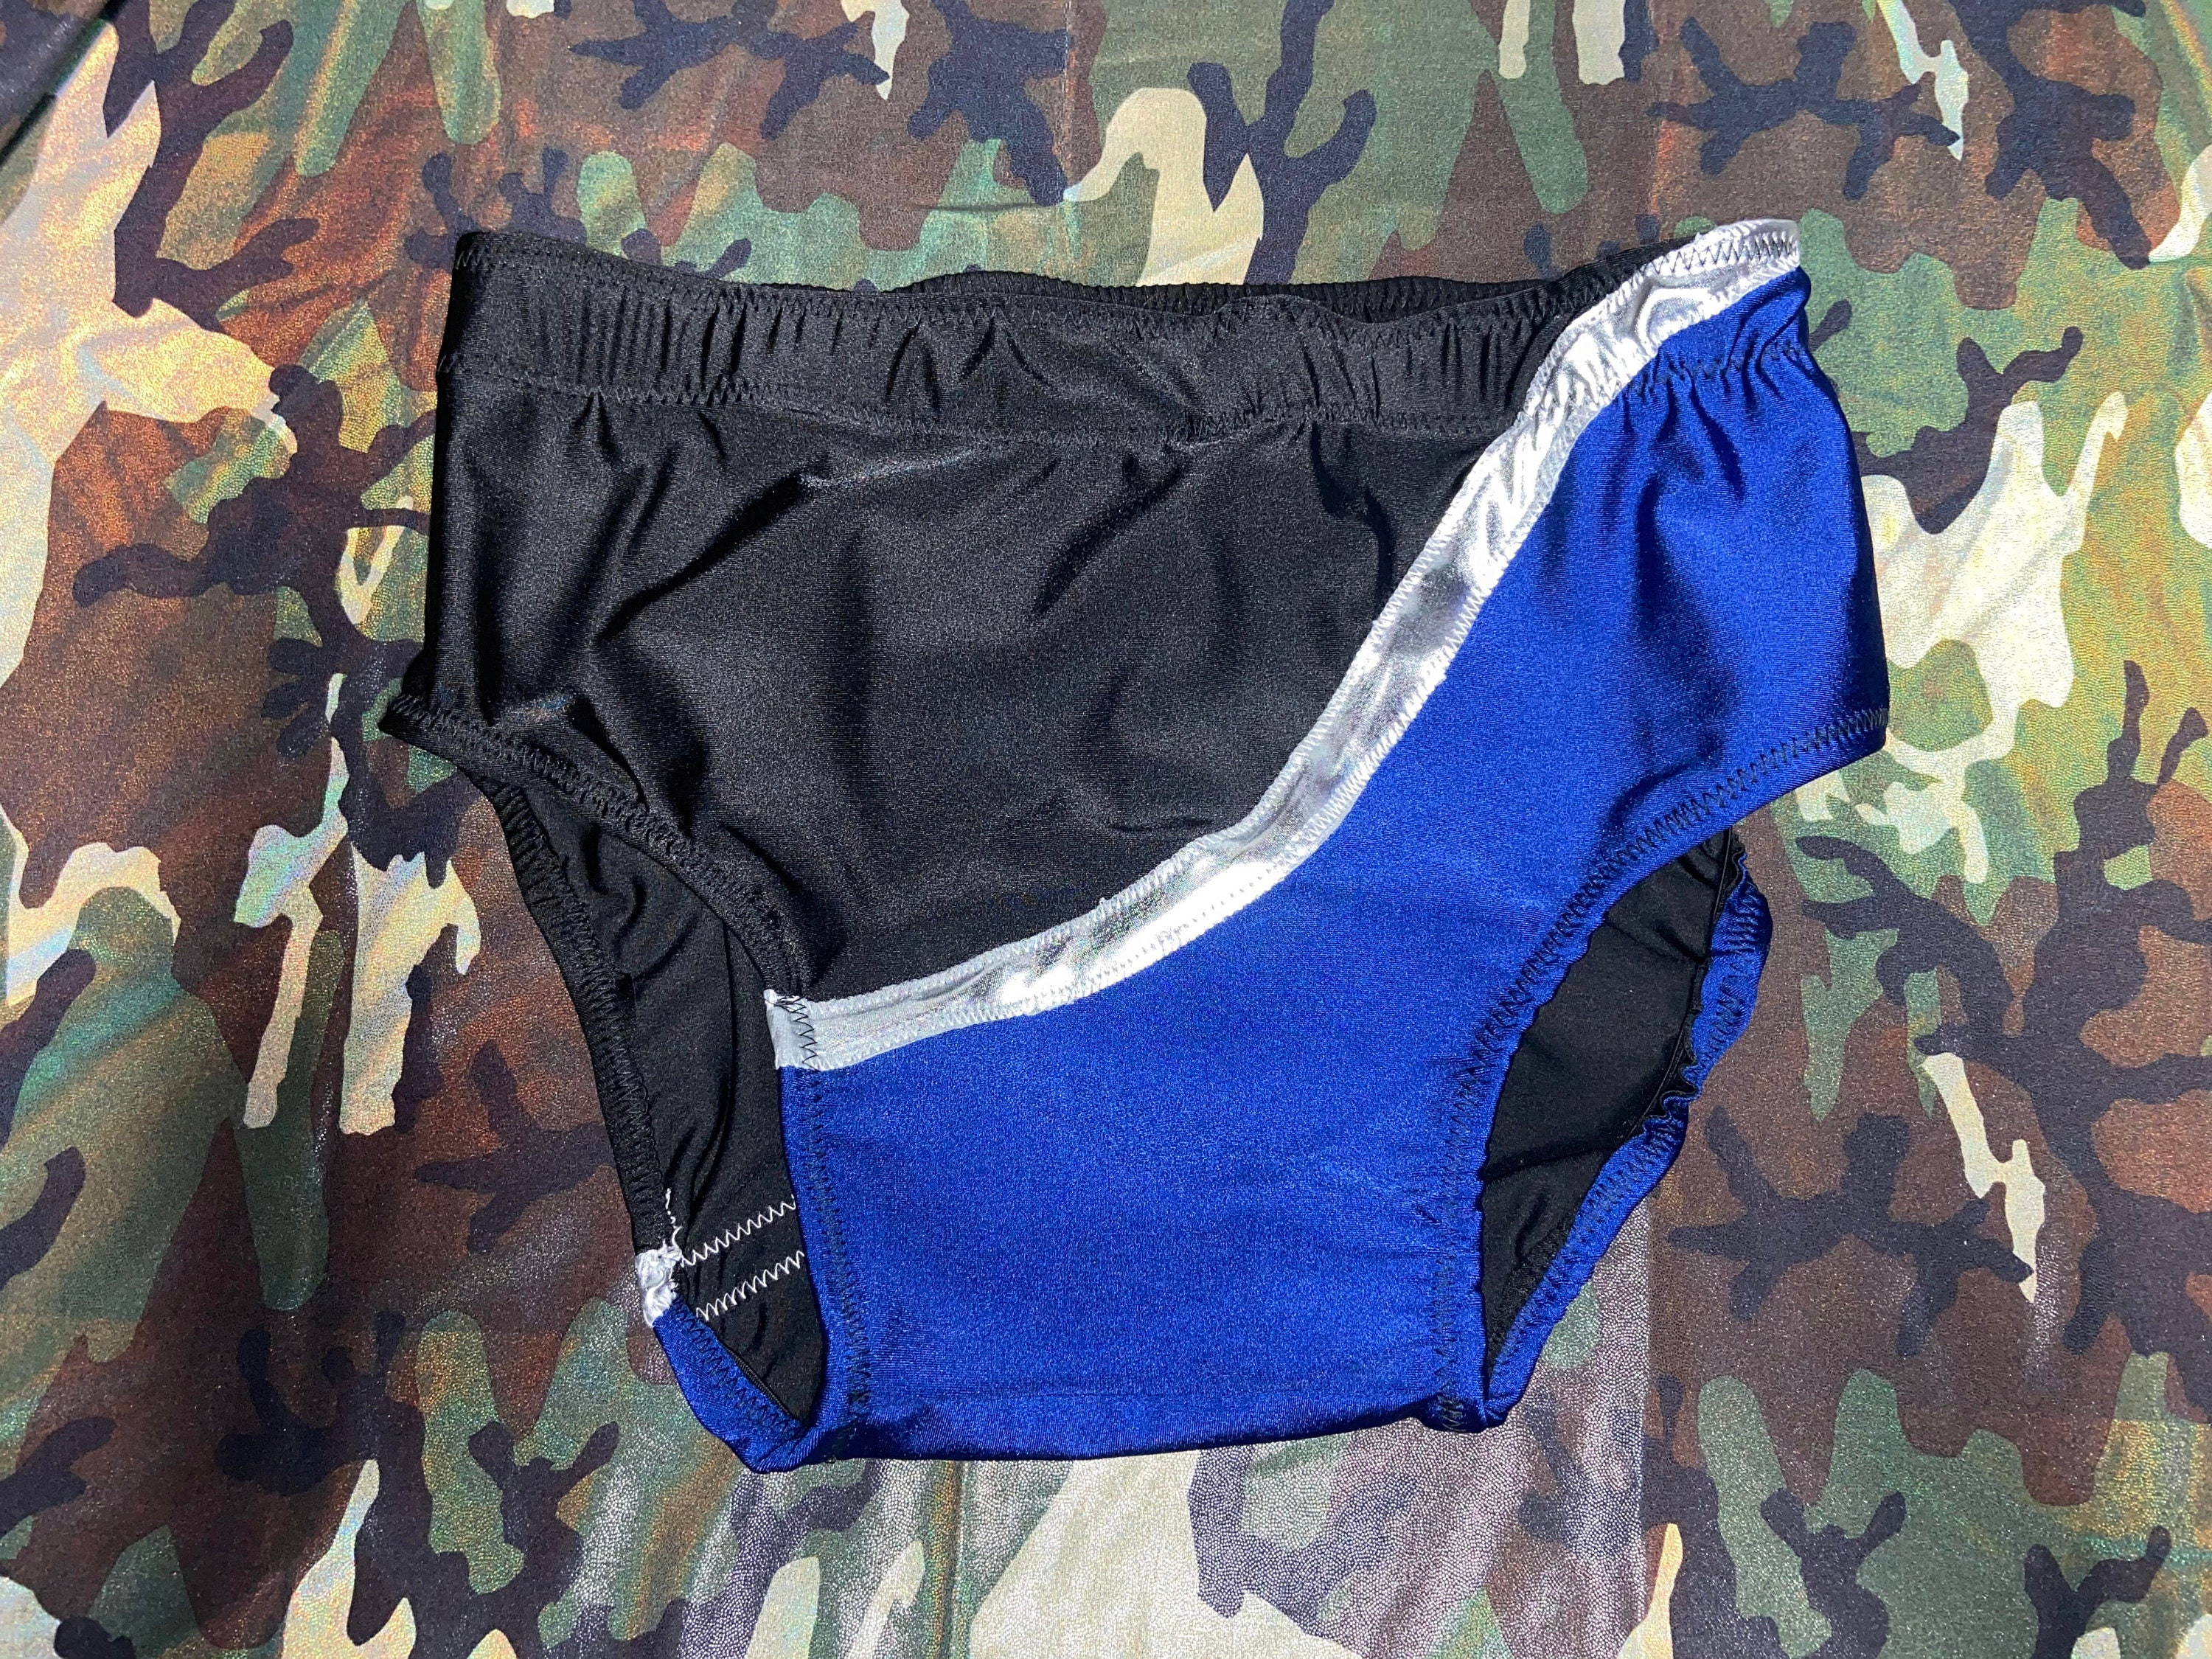 Pro Wrestling Gear Black Trunks With Blue & Silver Accent - Etsy Australia